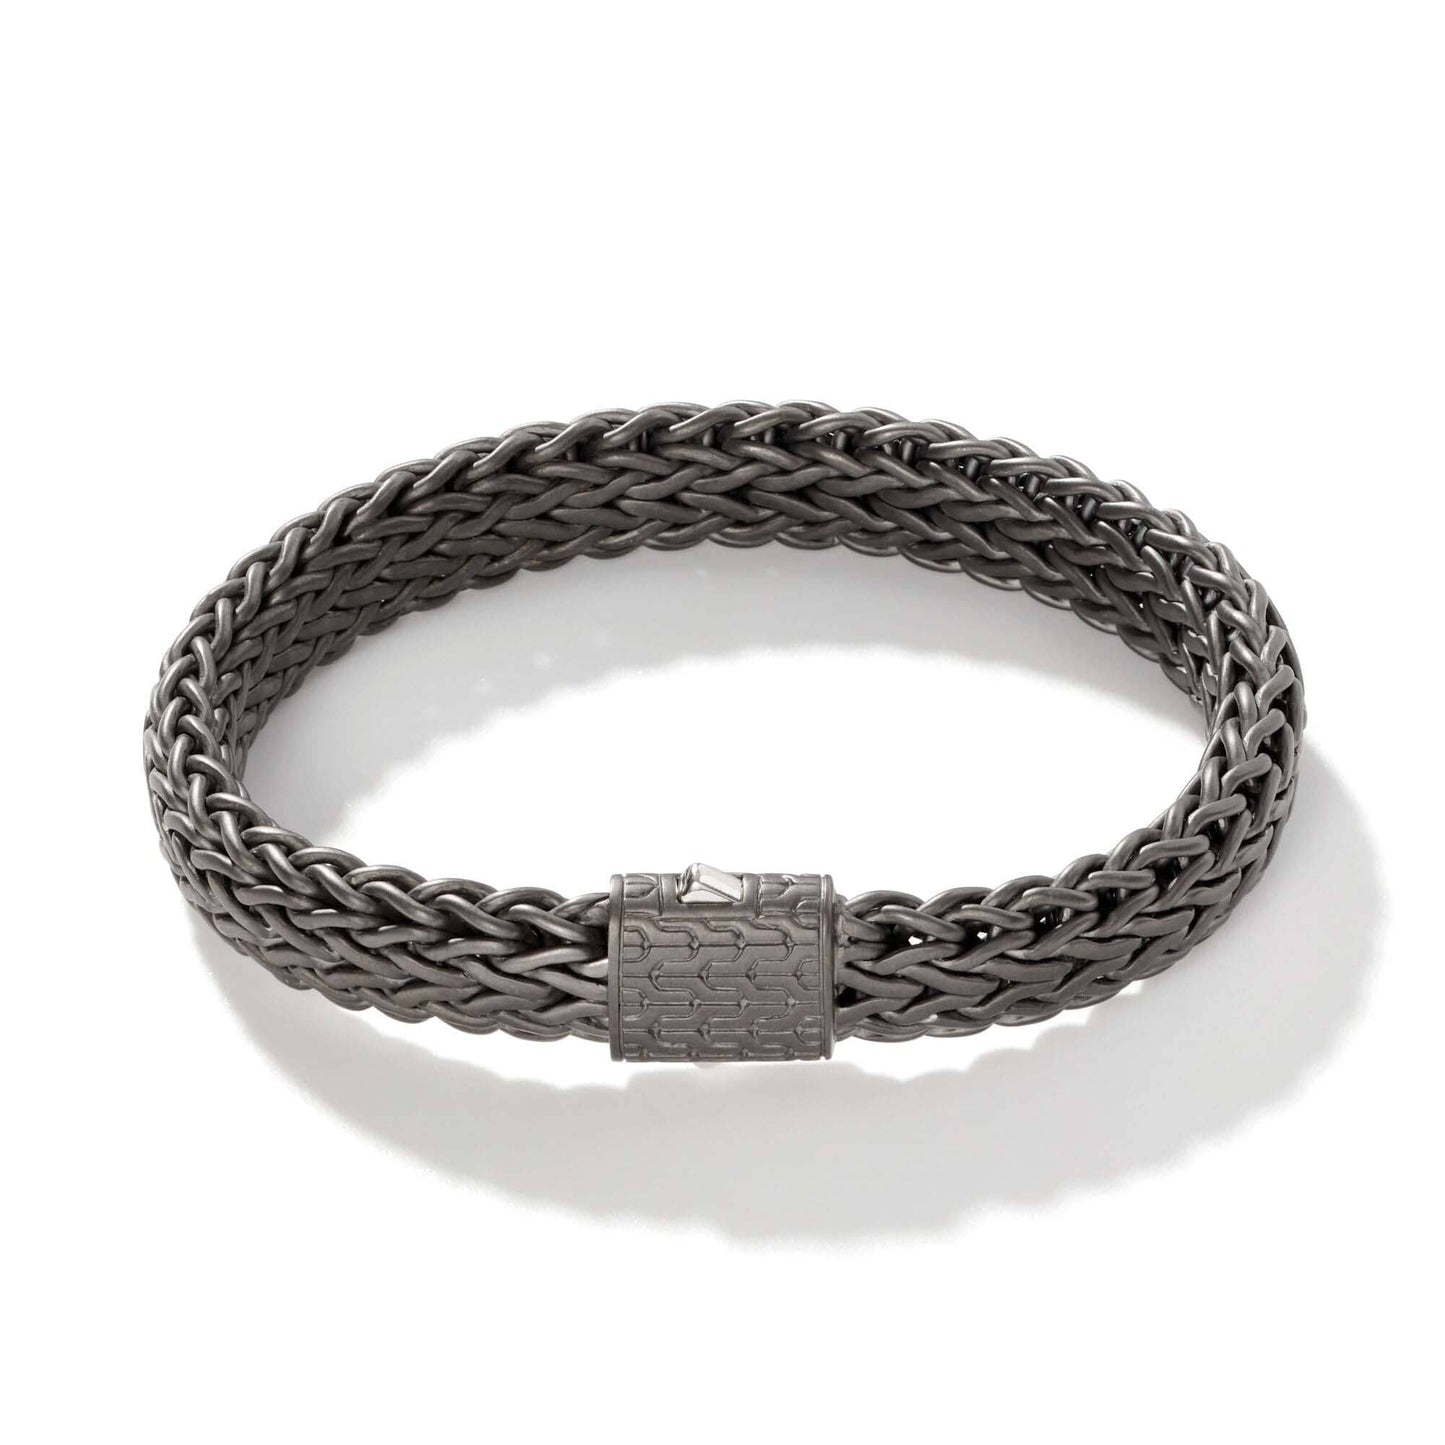 John Hardy 11MM Mens Classic Chain Bracelet in Black Rhodium Plated Sterling Silver